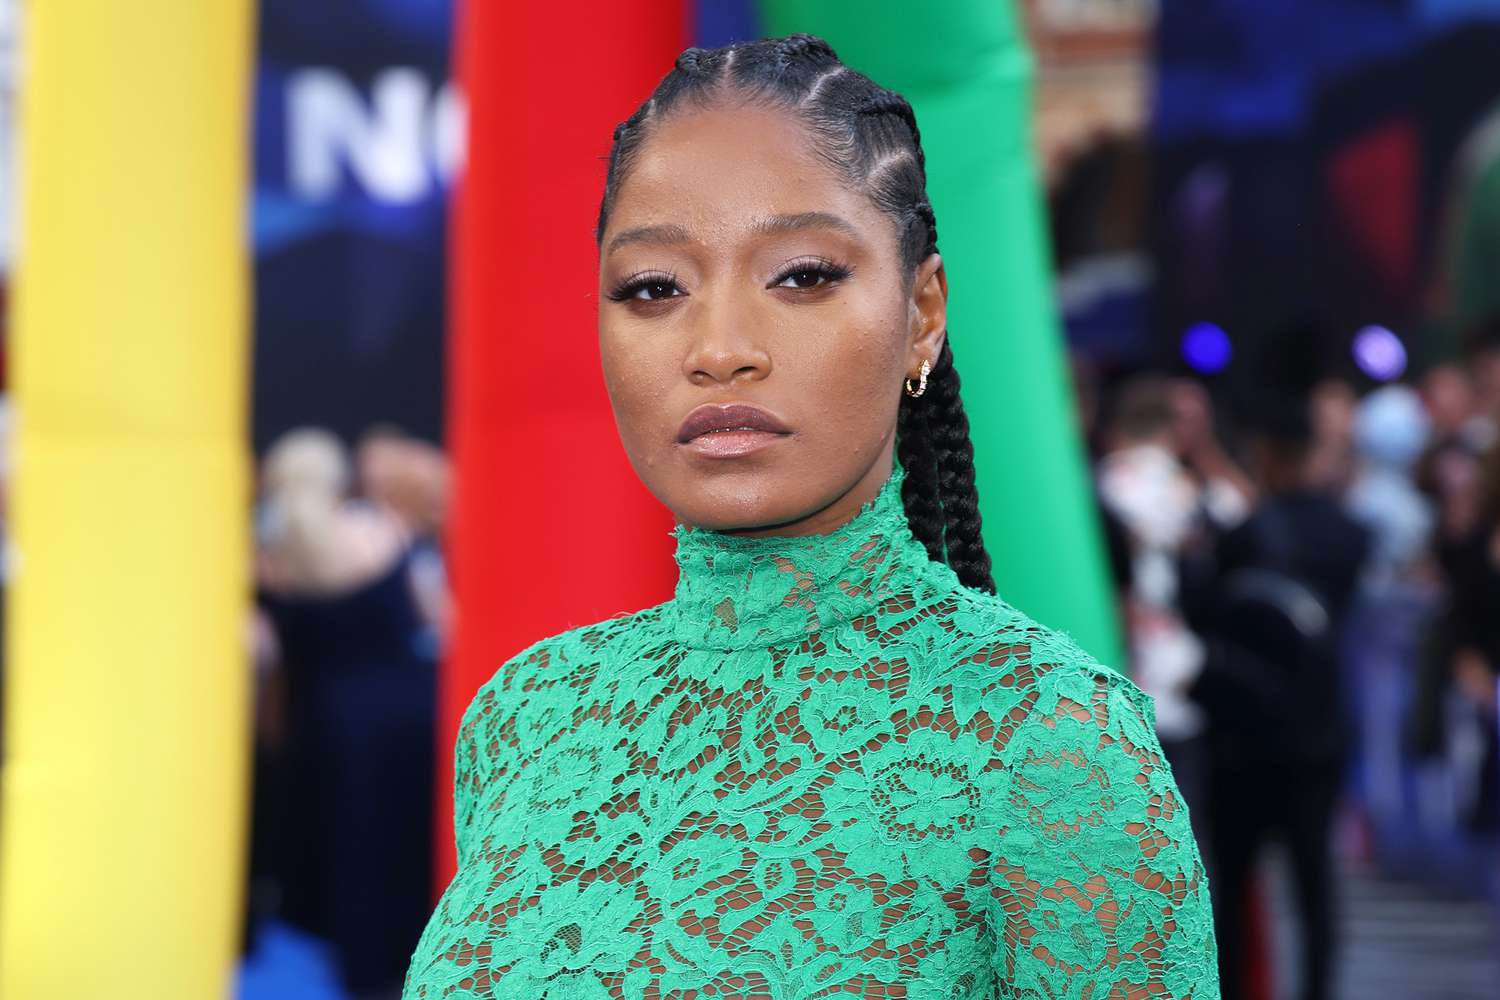 Keke Palmer Gets Honest About Her Split From Ex-Boyfriend Darius Jackson: ‘My Life is Truly Unraveling at the Seams’ [Video]